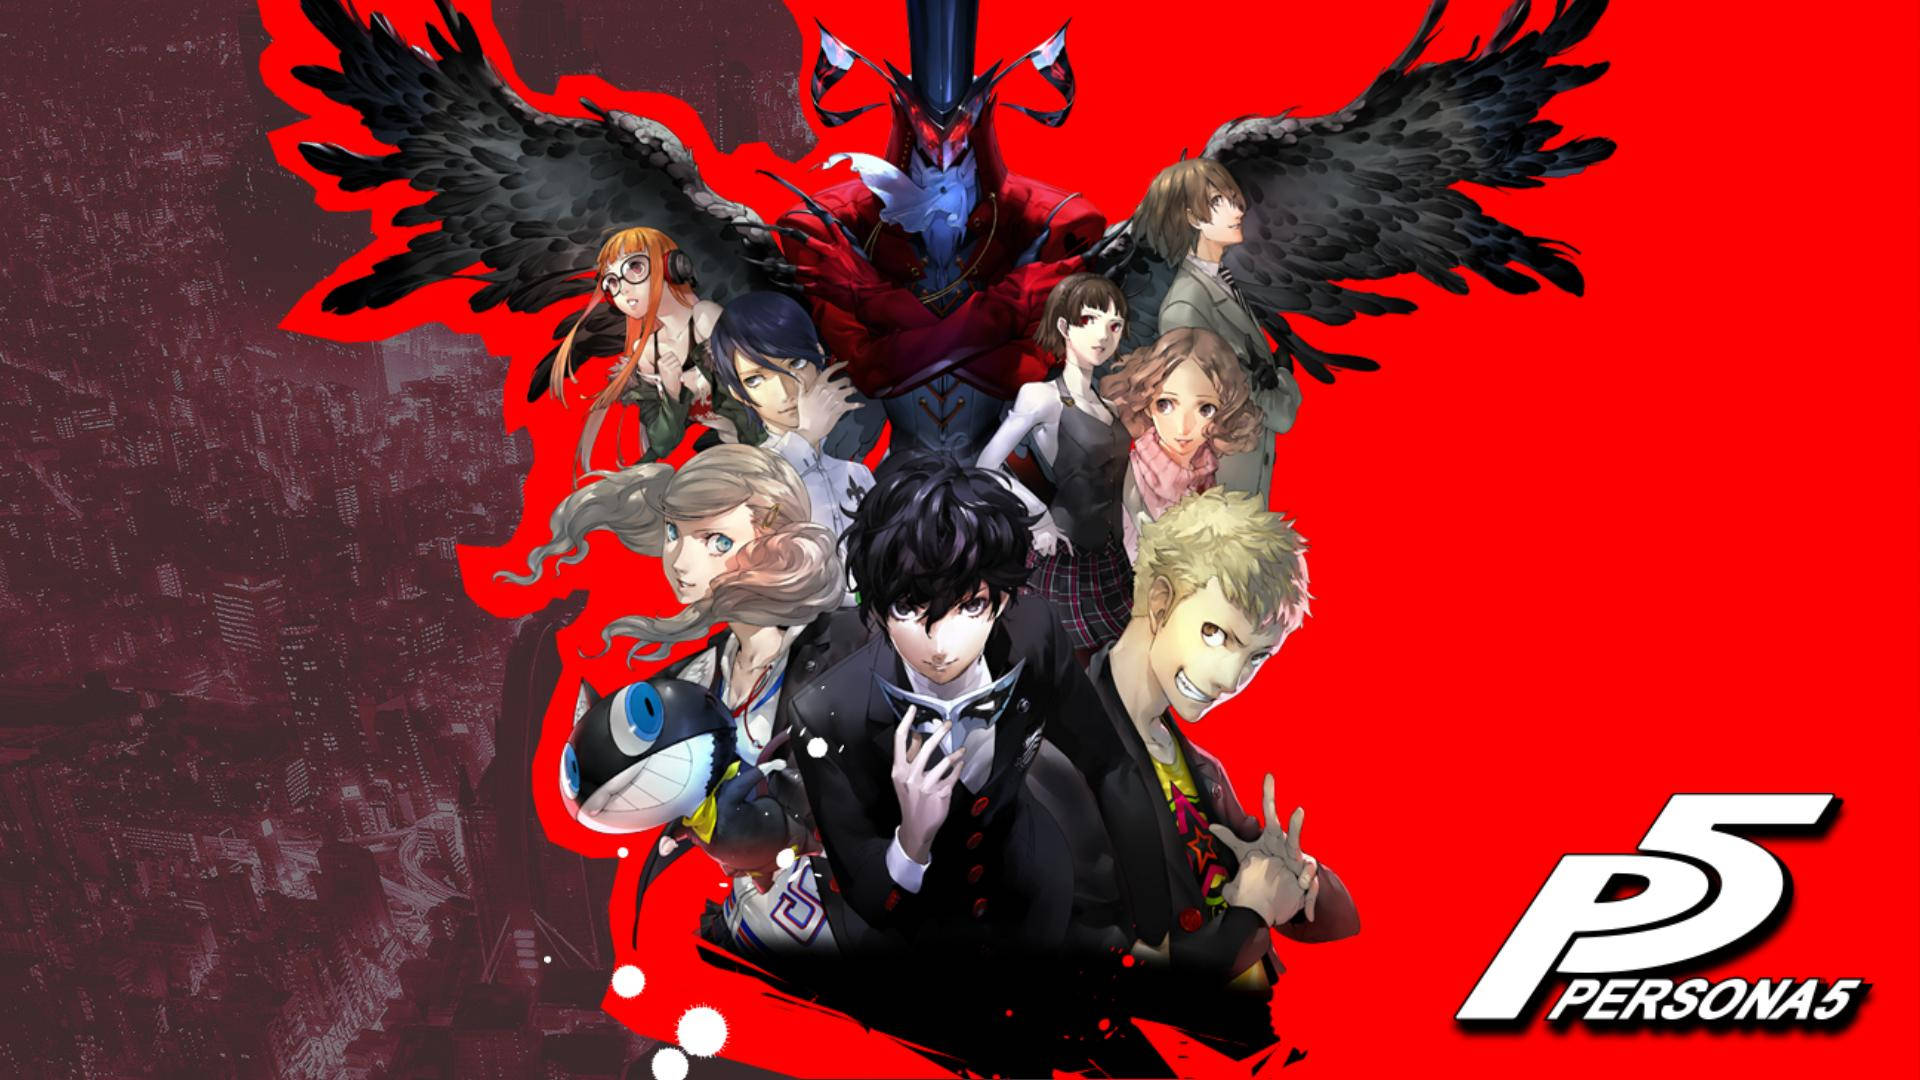 Persona 5 - Joker and the Phantom Thieves in Action Wallpaper